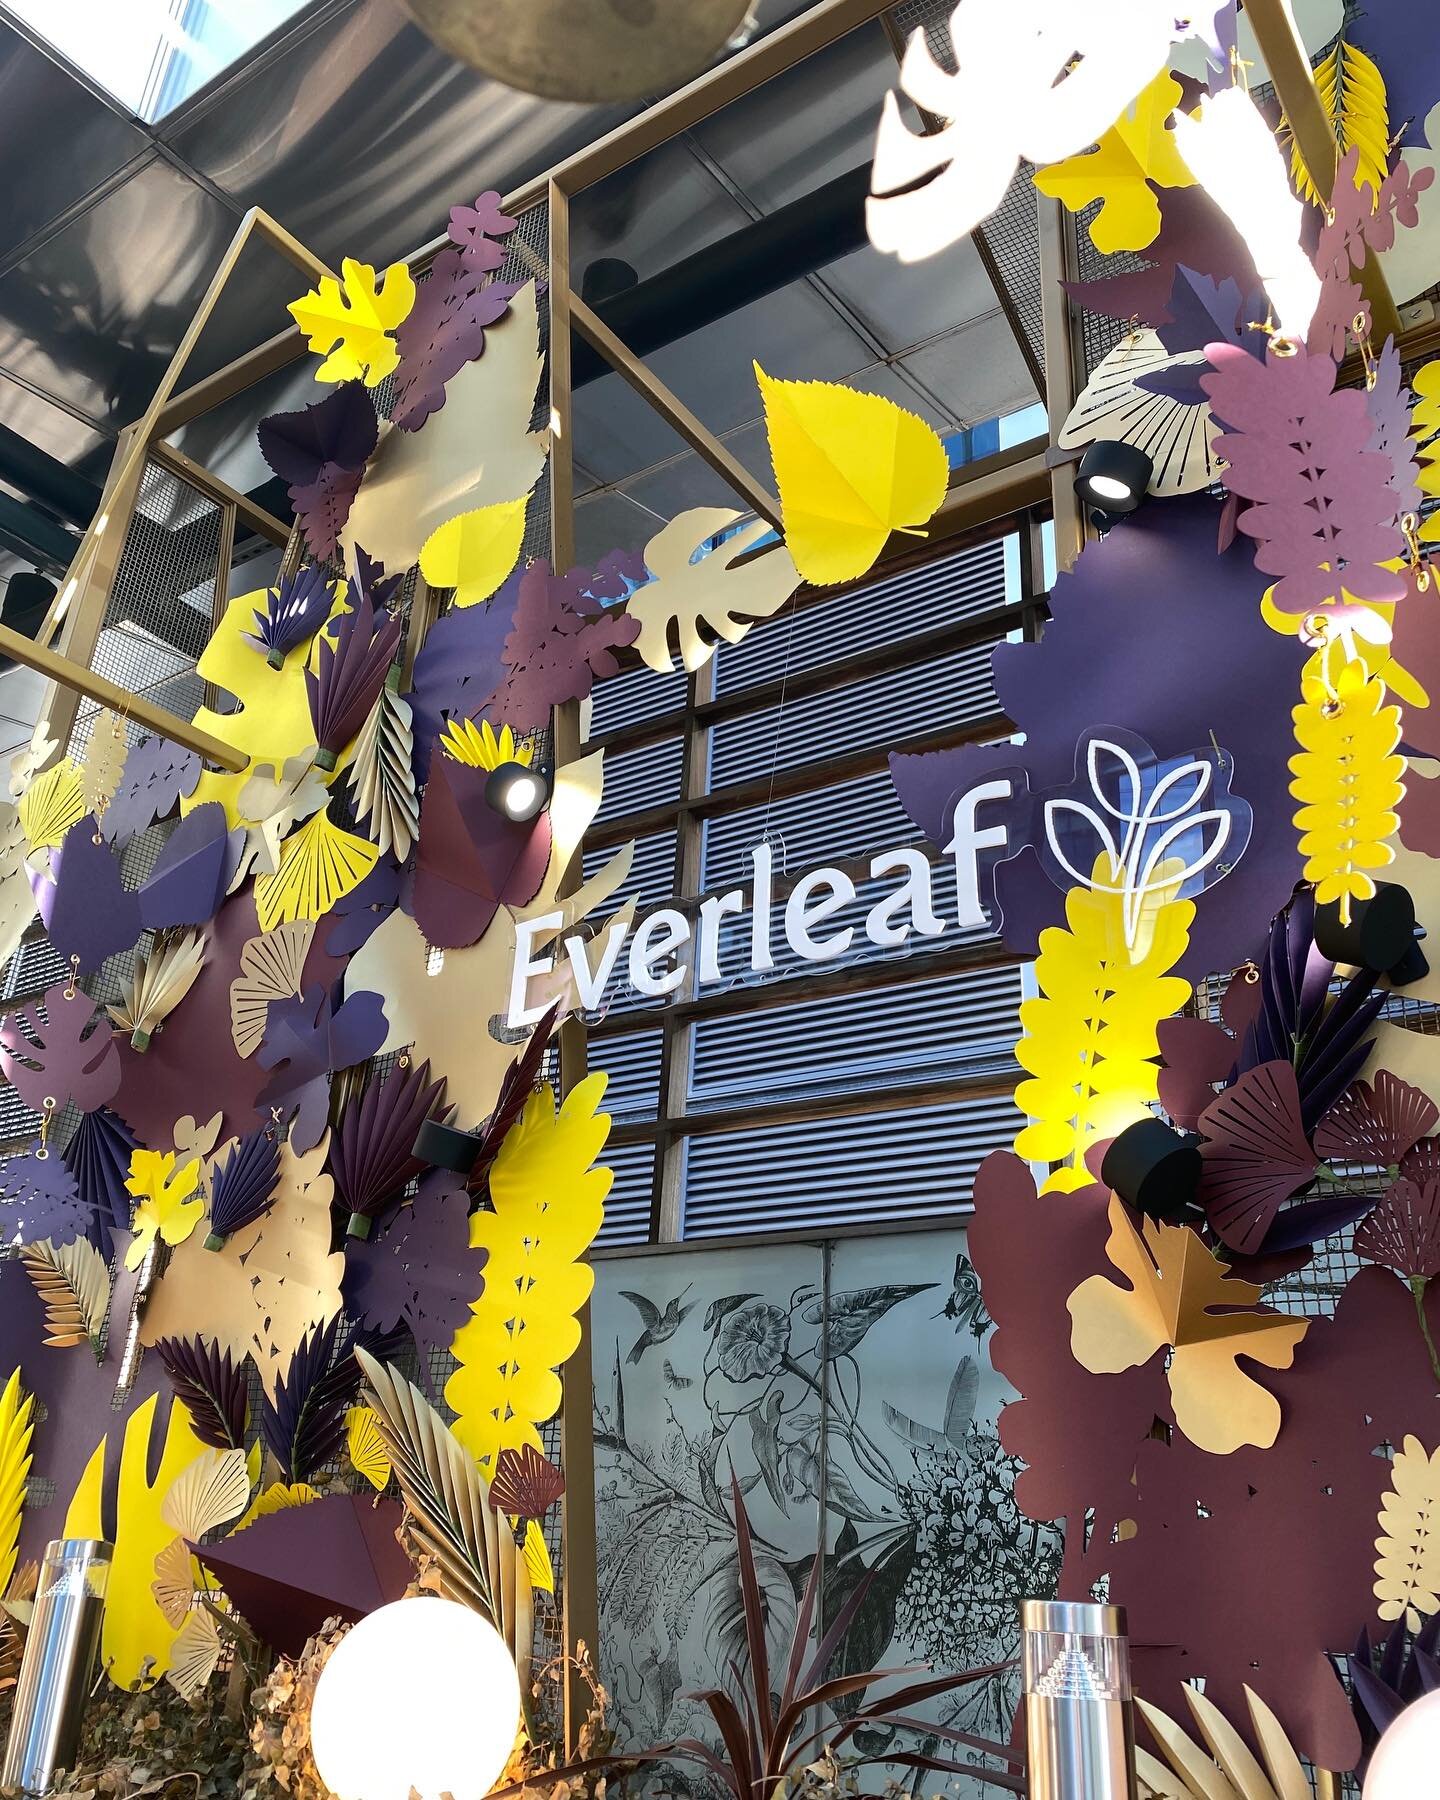 Last week marked another exciting collaboration with our friends at @everleafdrinks as we joined them for the second stop on their 'Rewilding of The City' tour across London! 🍁 🍂

This time, we took over @thealchemistuk at Canary Wharf to unveil ou